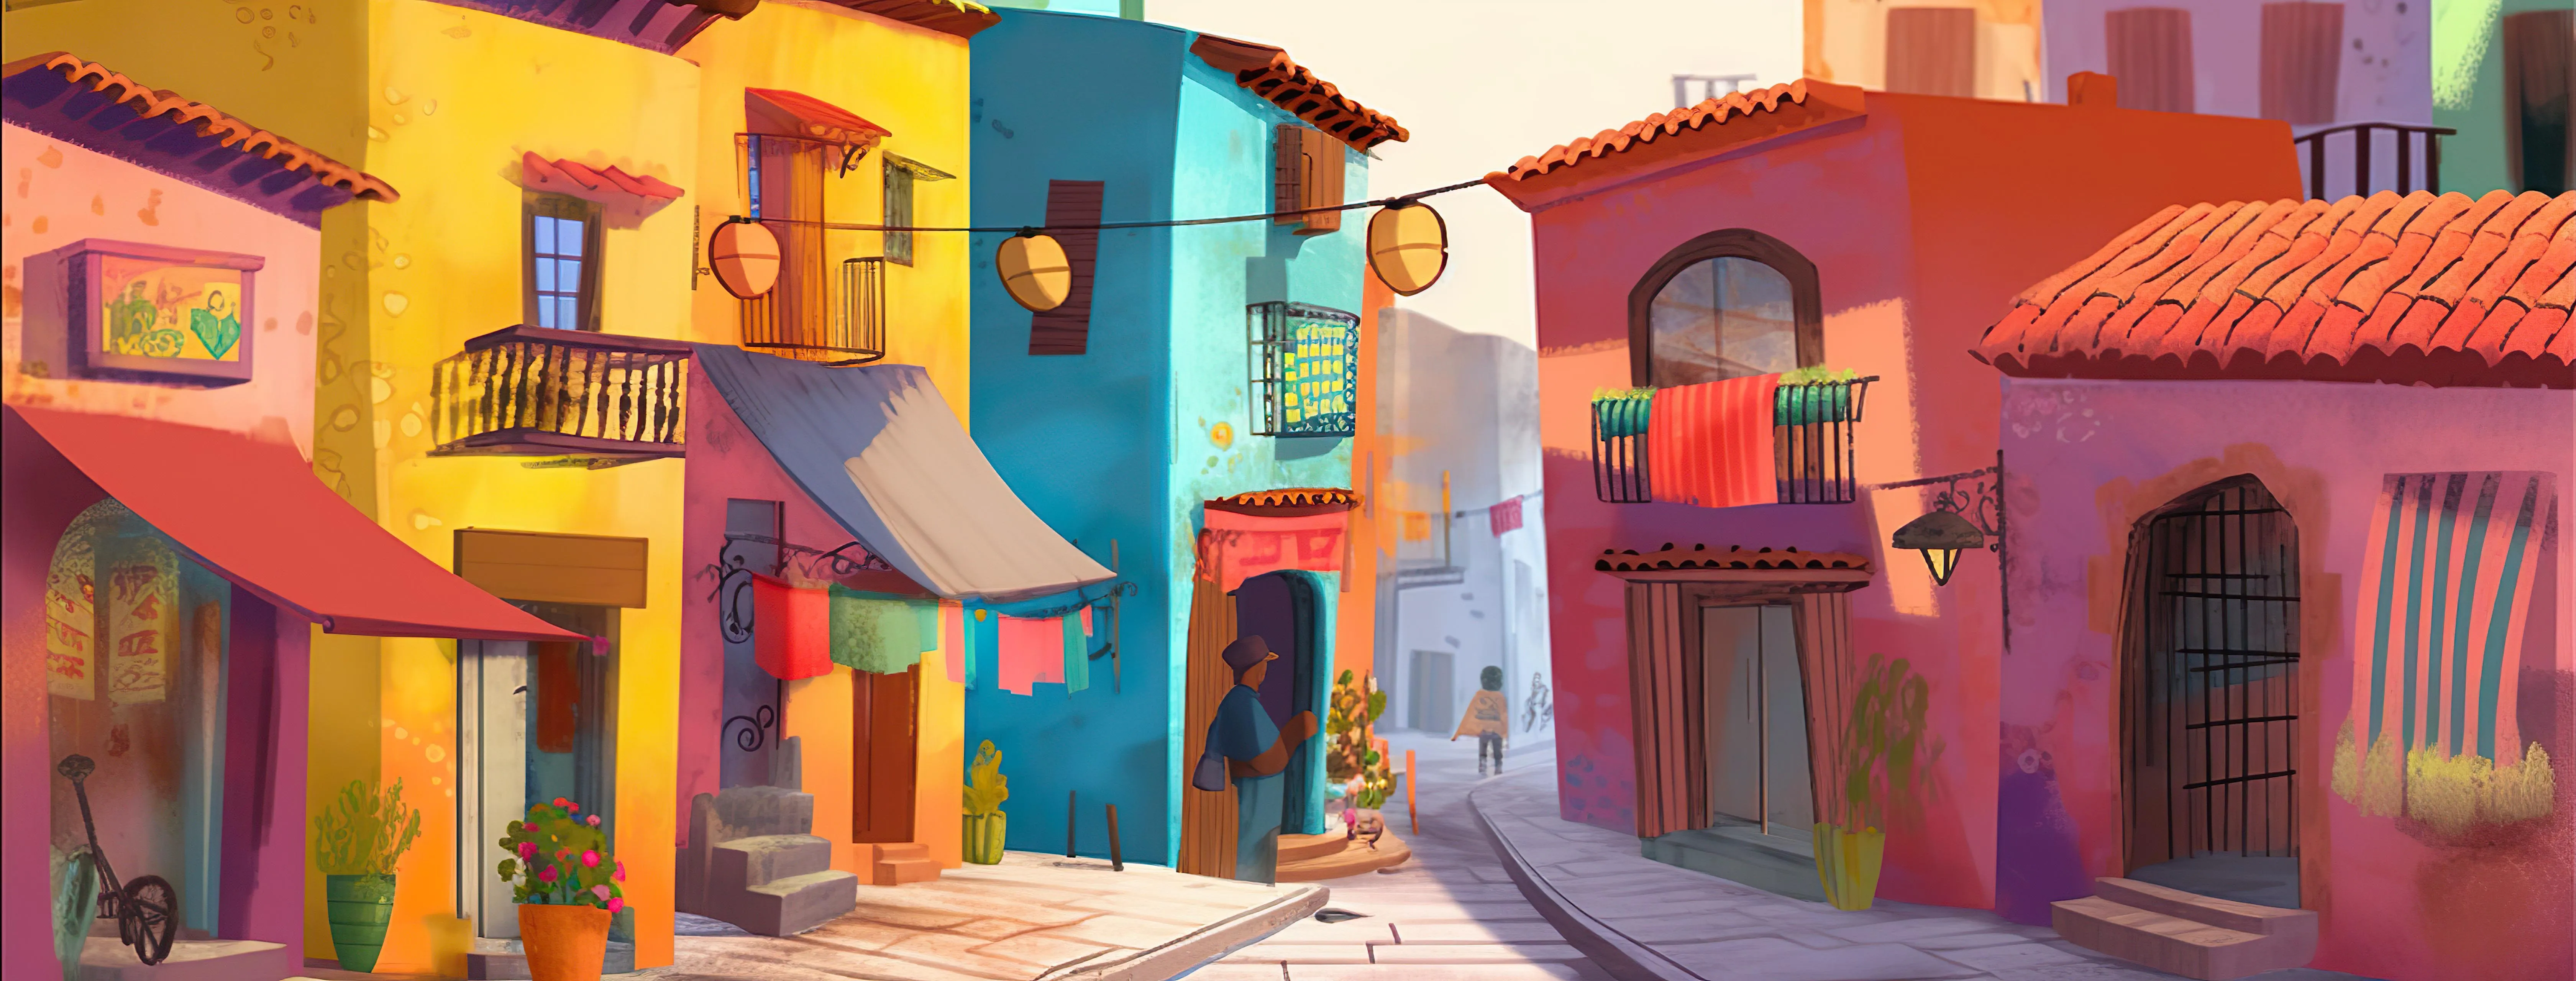 A colorful painting of a traditional mexican village 